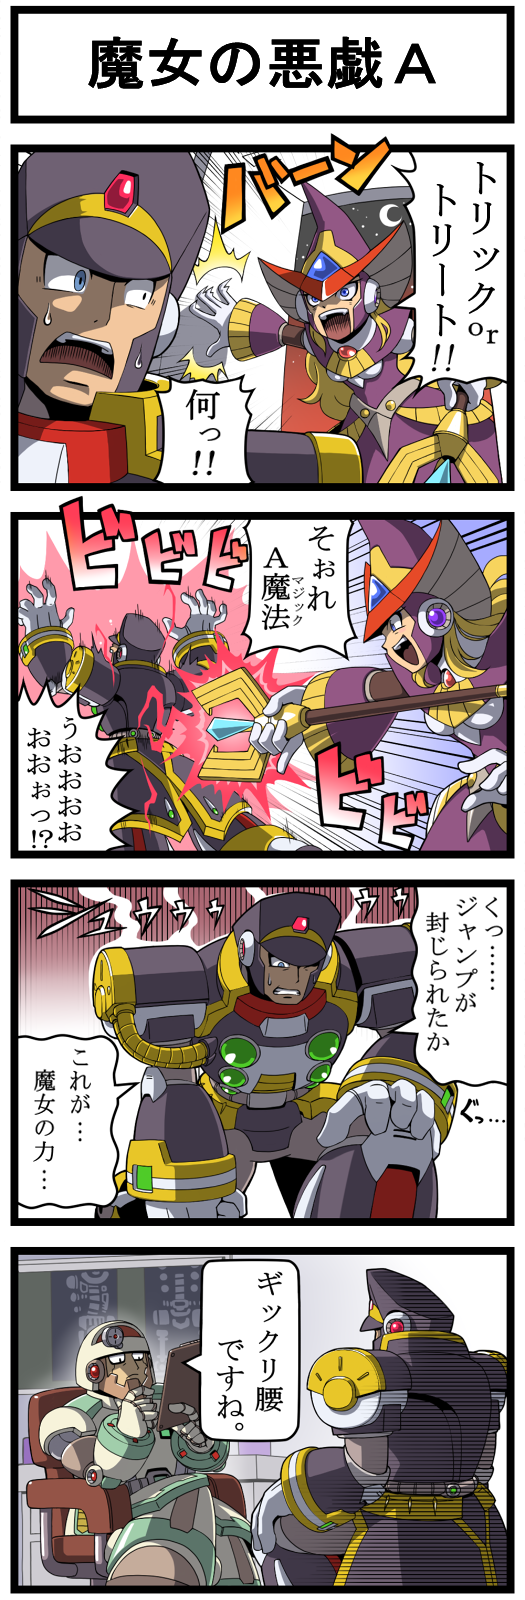 1girl 2boys 4koma android berkana blonde_hair blue_eyes comedy comic dress lifesaver long_hair multiple_boys napo nurse open_mouth red_eyes robot rockman rockman_x screaming signas tagme text translation_request witch